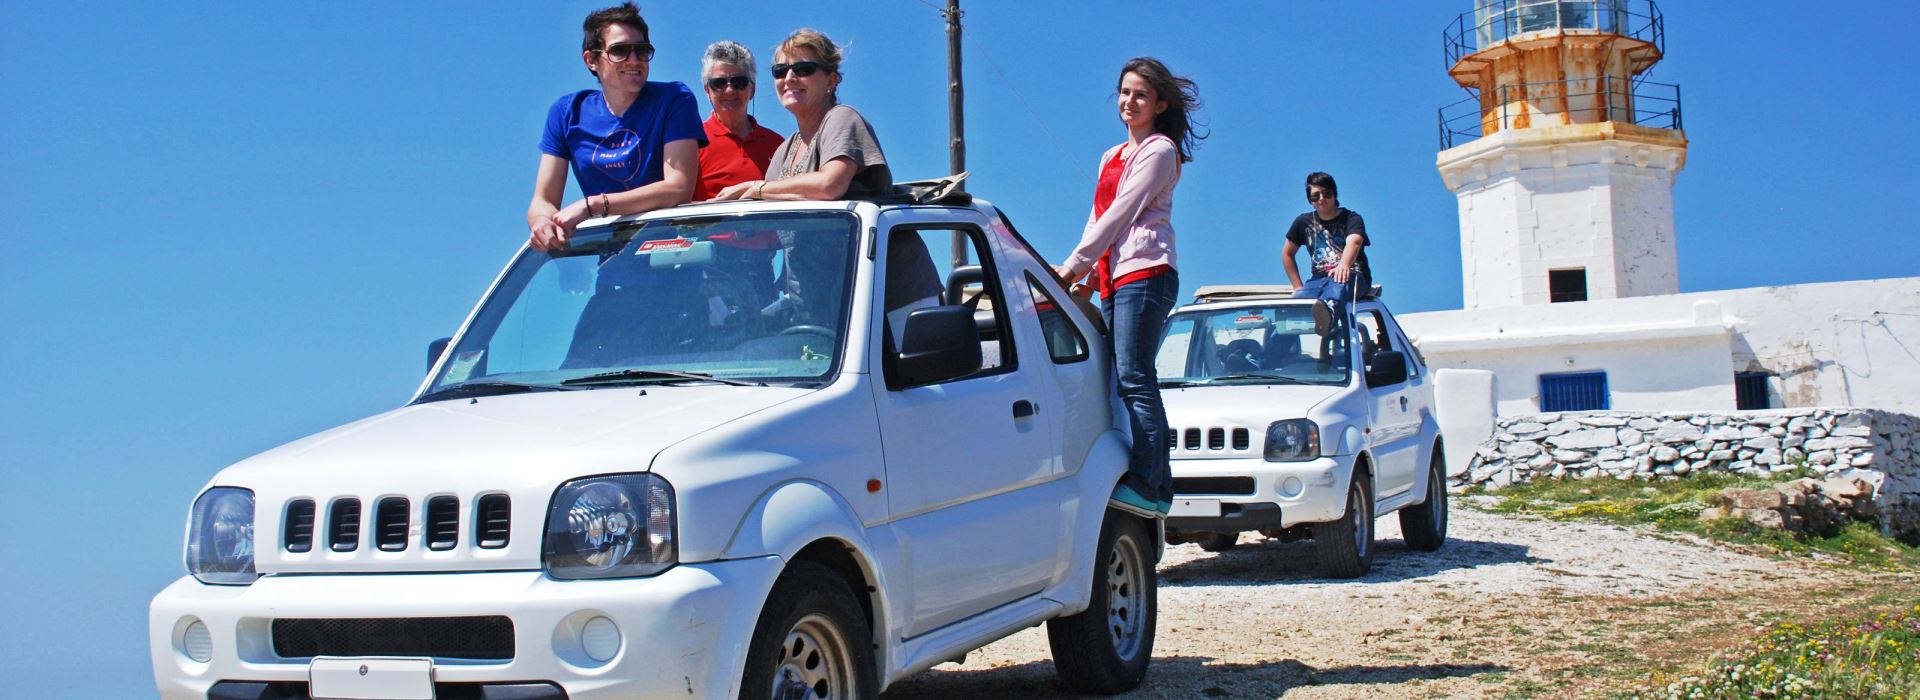 Mykonos Jeep Safari Full Day Tour - Book Now online at the best price